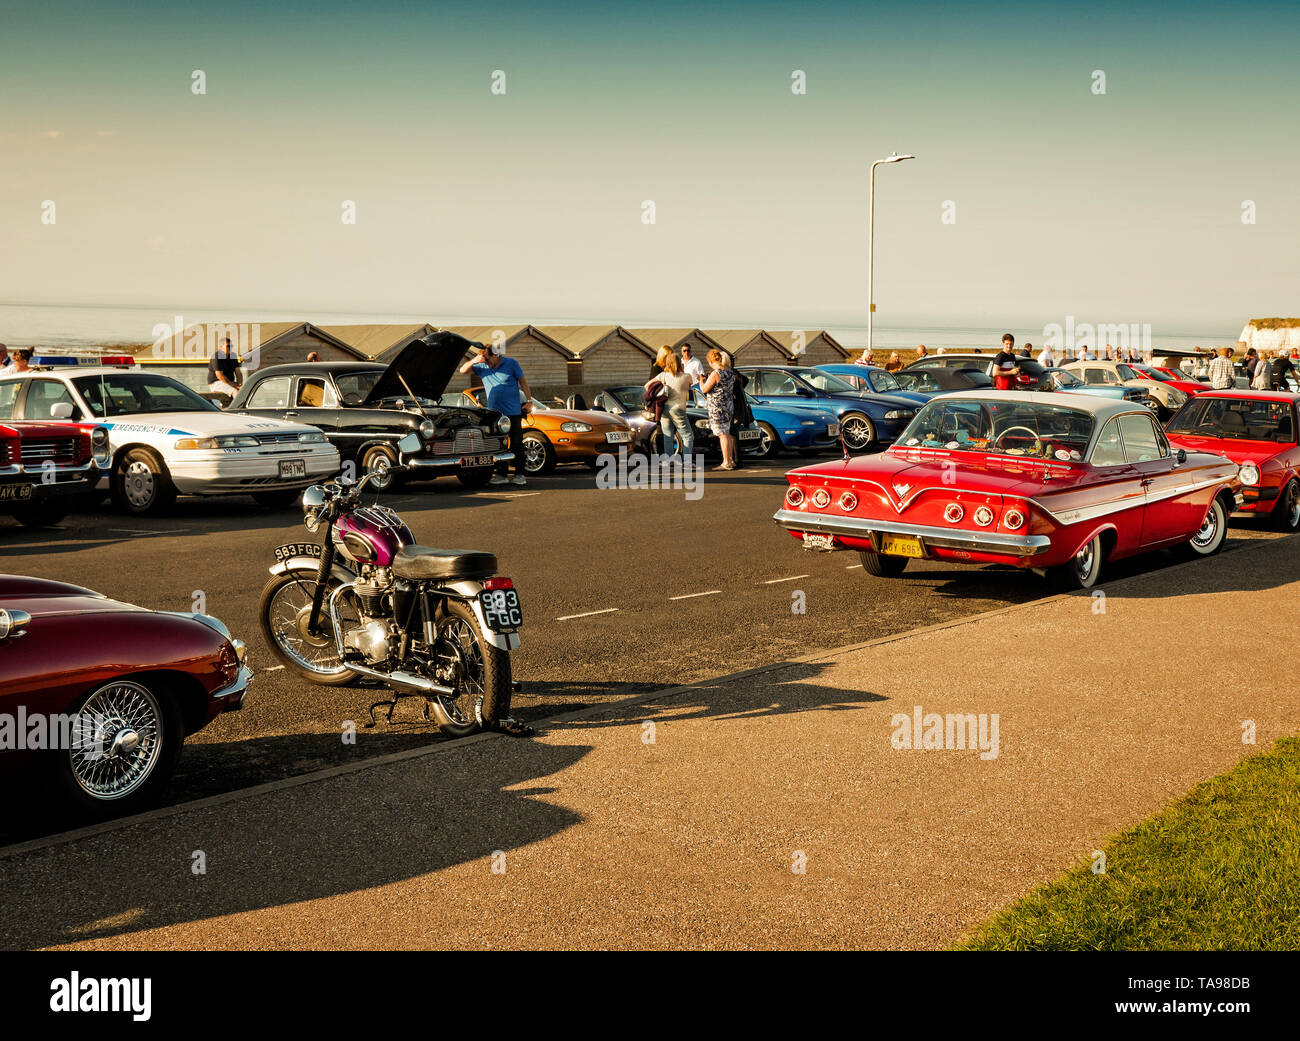 1963 Triumph Trophy Motorcycle at classic car gathering 'Classic & Chips' in Minnis Bay Birchington Kent UK 21/05/2019 Stock Photo